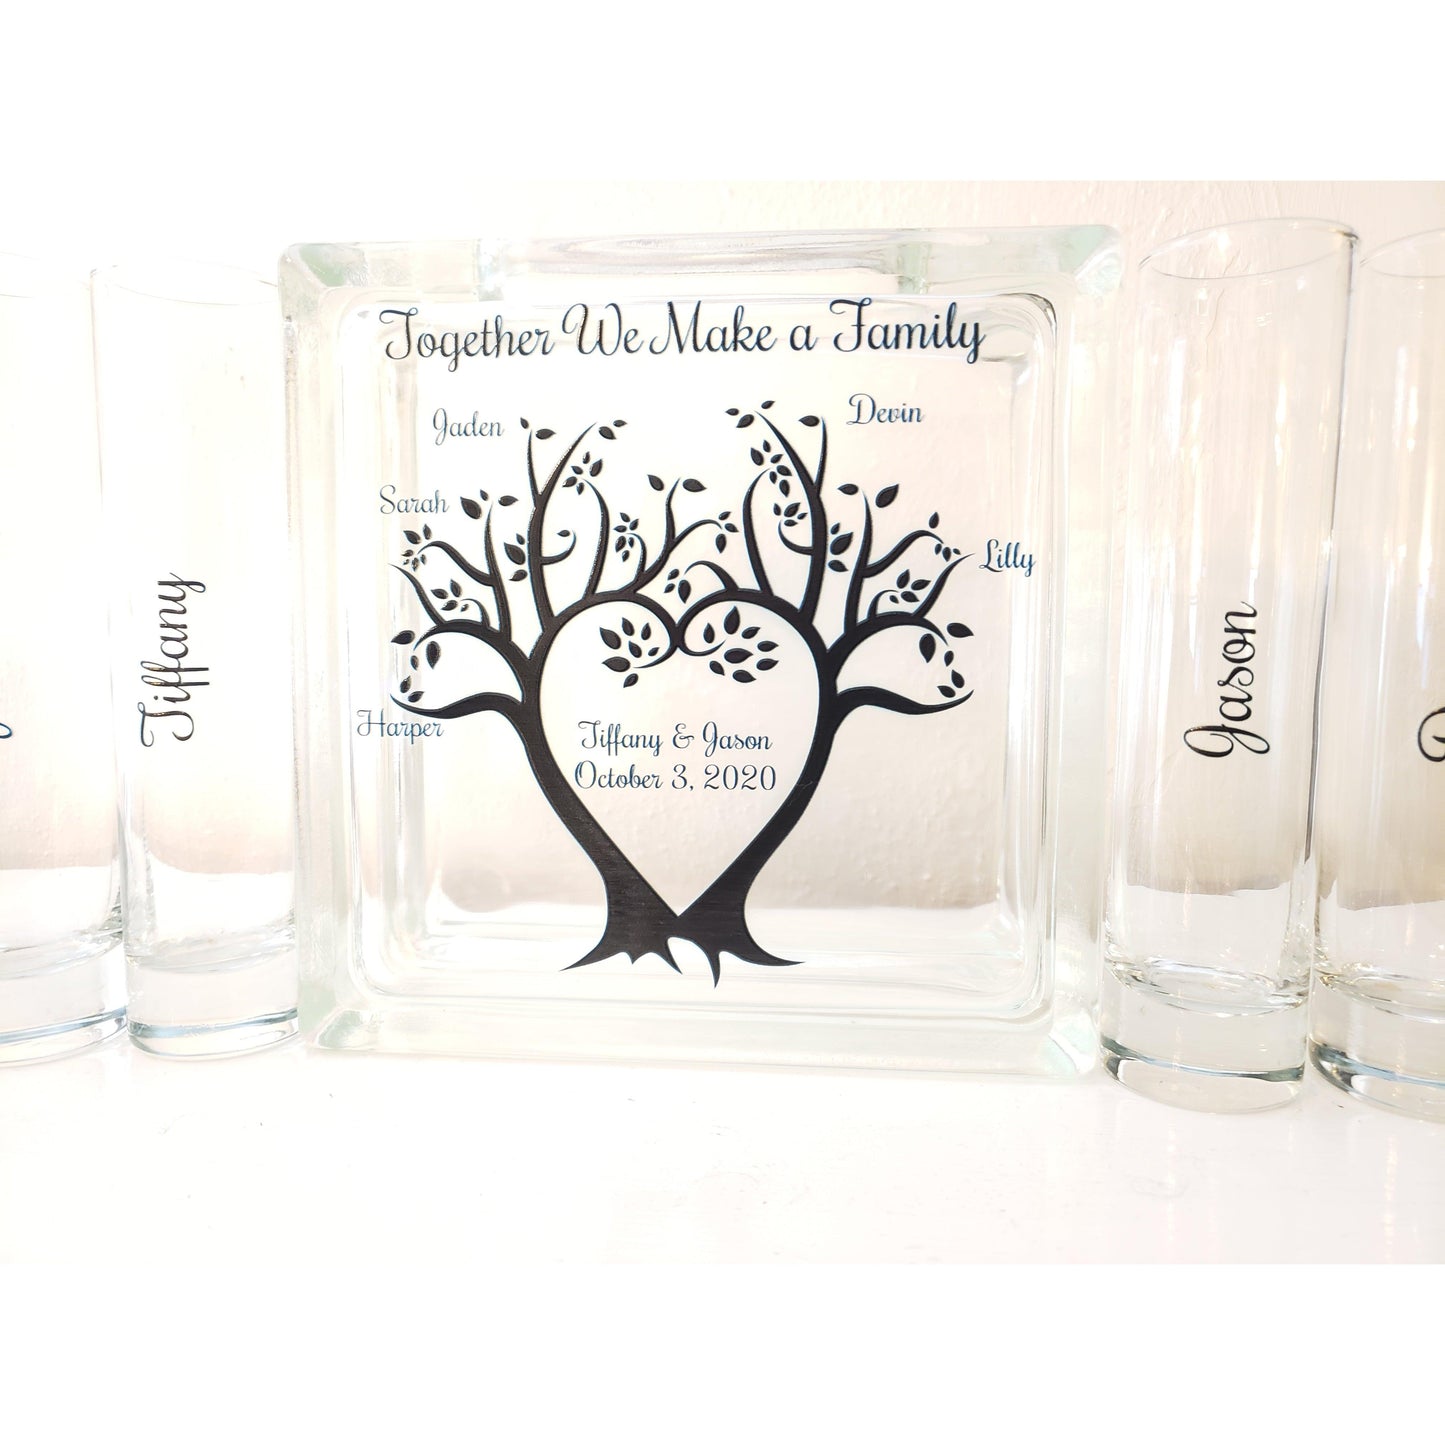 Wedding Unity Sand Ceremony Set Blended Family Together we Make a Family-Blended Family-Tree-TPUWUS207 - The PICKED Unlimited